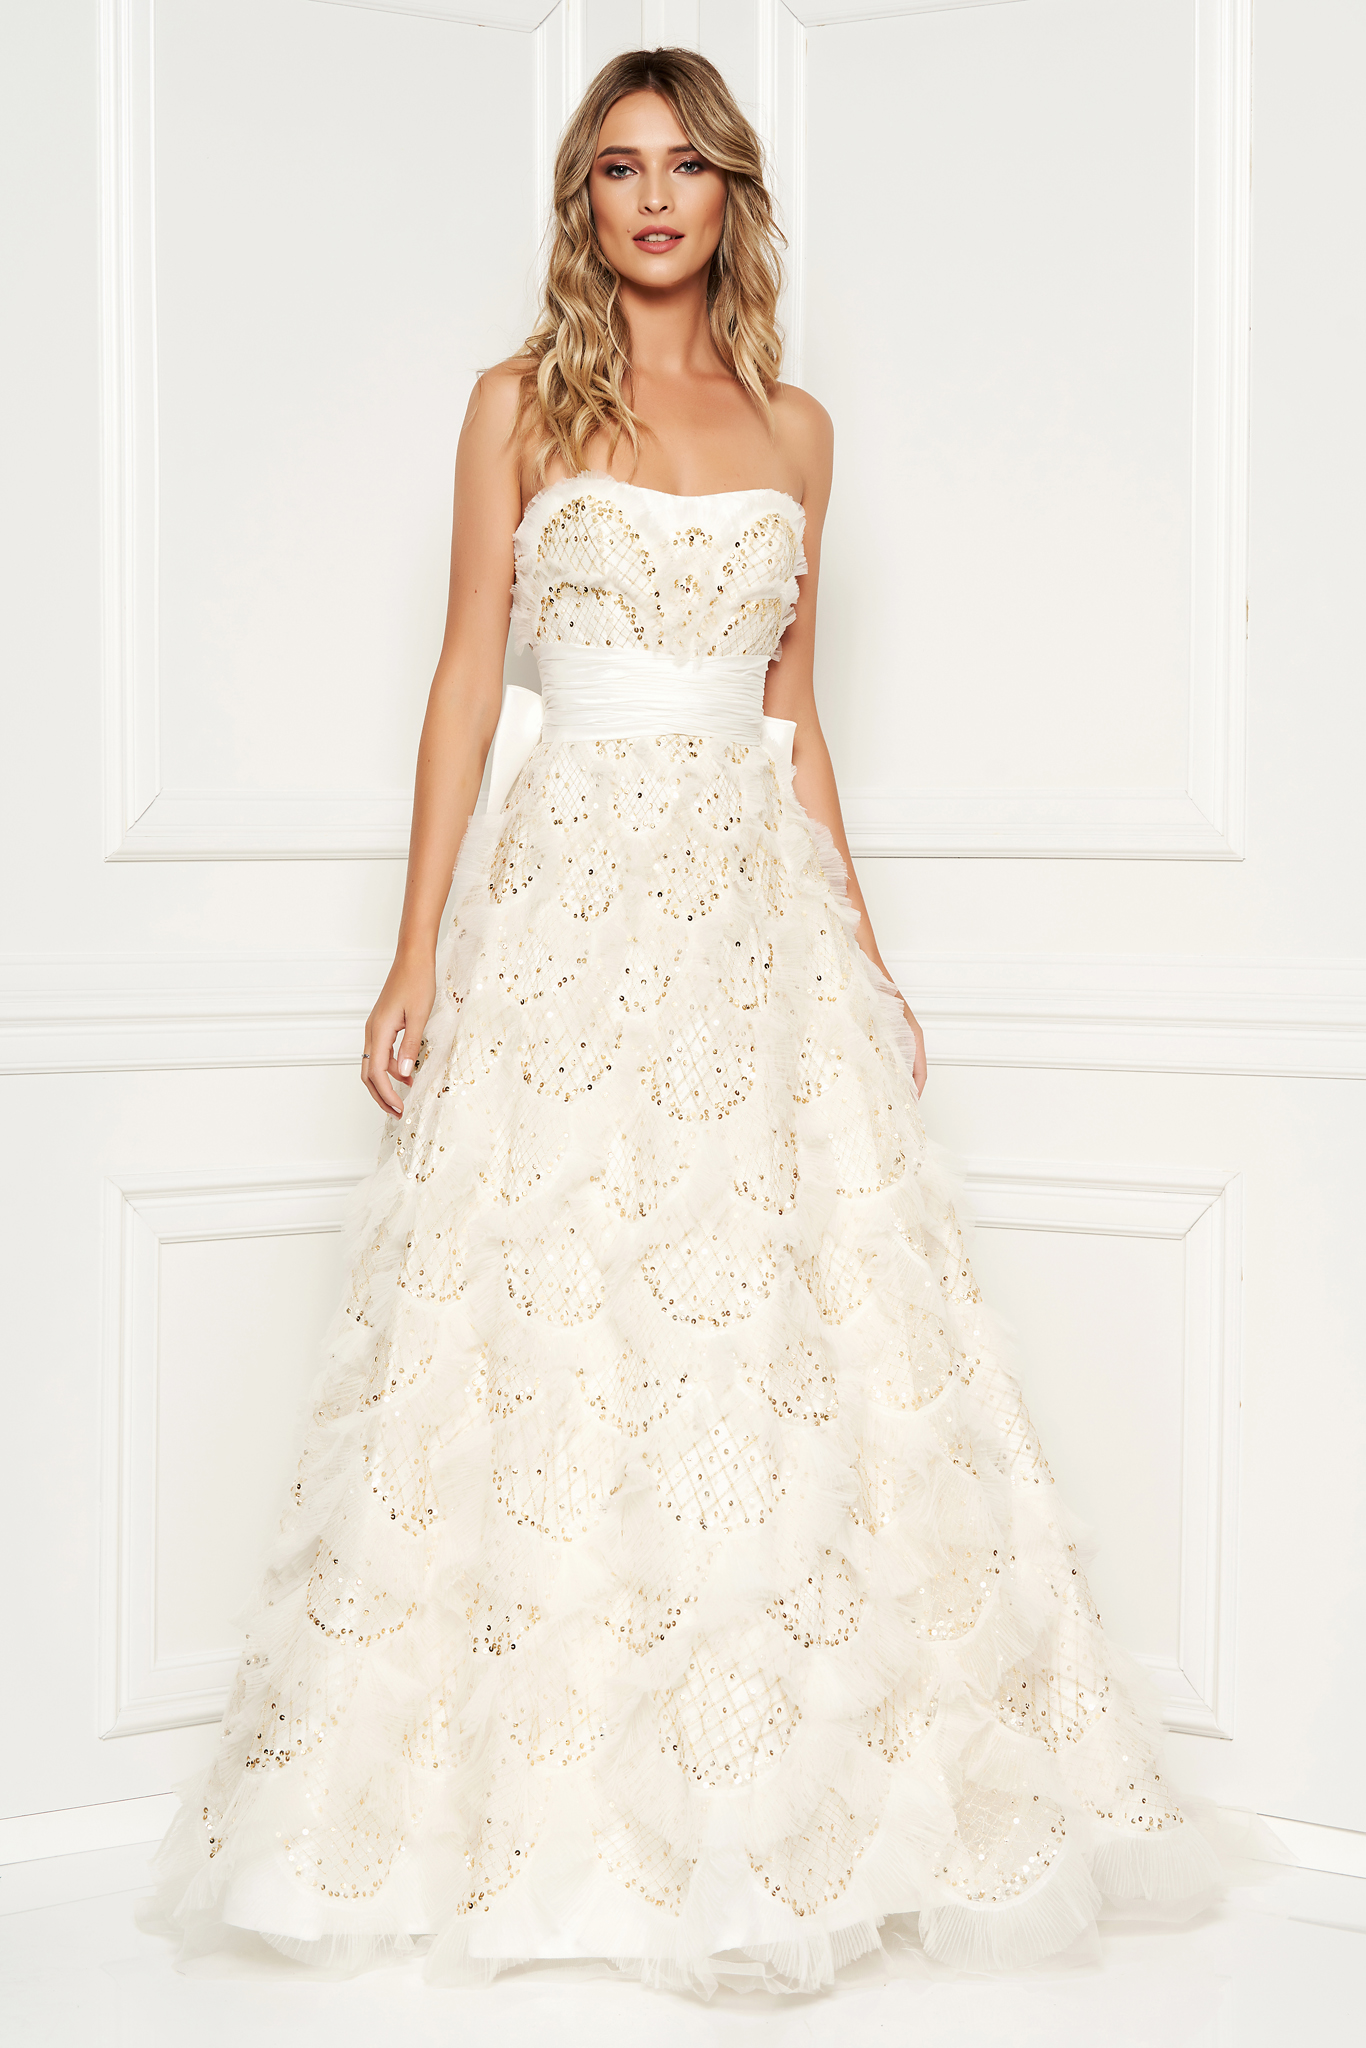 Sherri Hill luxurious white lace dress with crystal embellished details 2 - StarShinerS.com